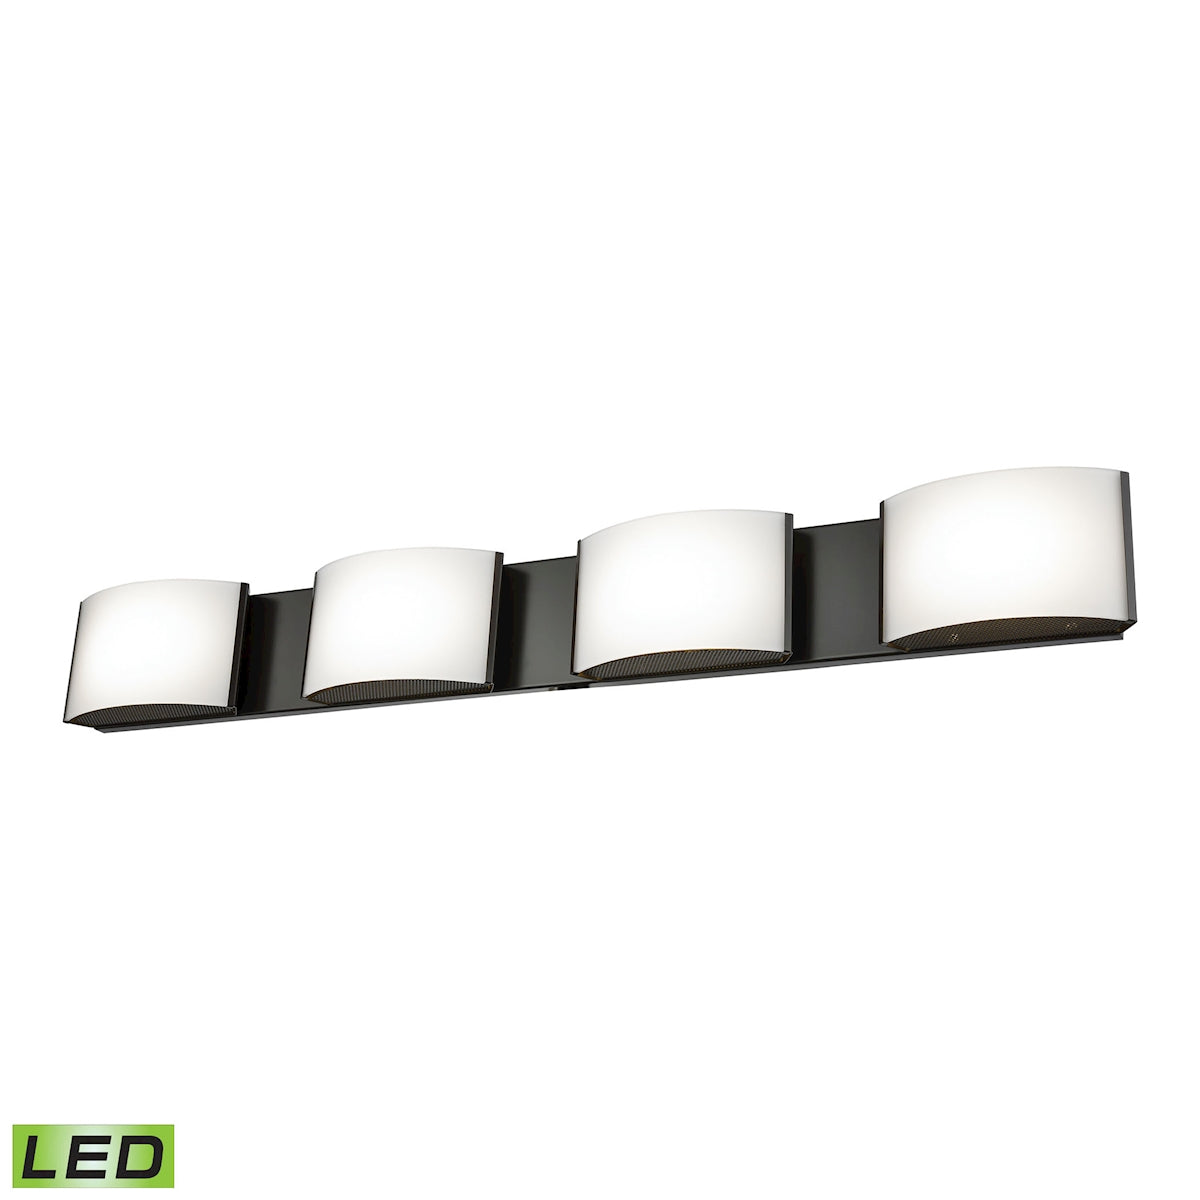 ELK Lighting BVL914-10-45 Pandora 4-Light Vanity Sconce in Oiled Bronze with Opal Glass - Integrated LED